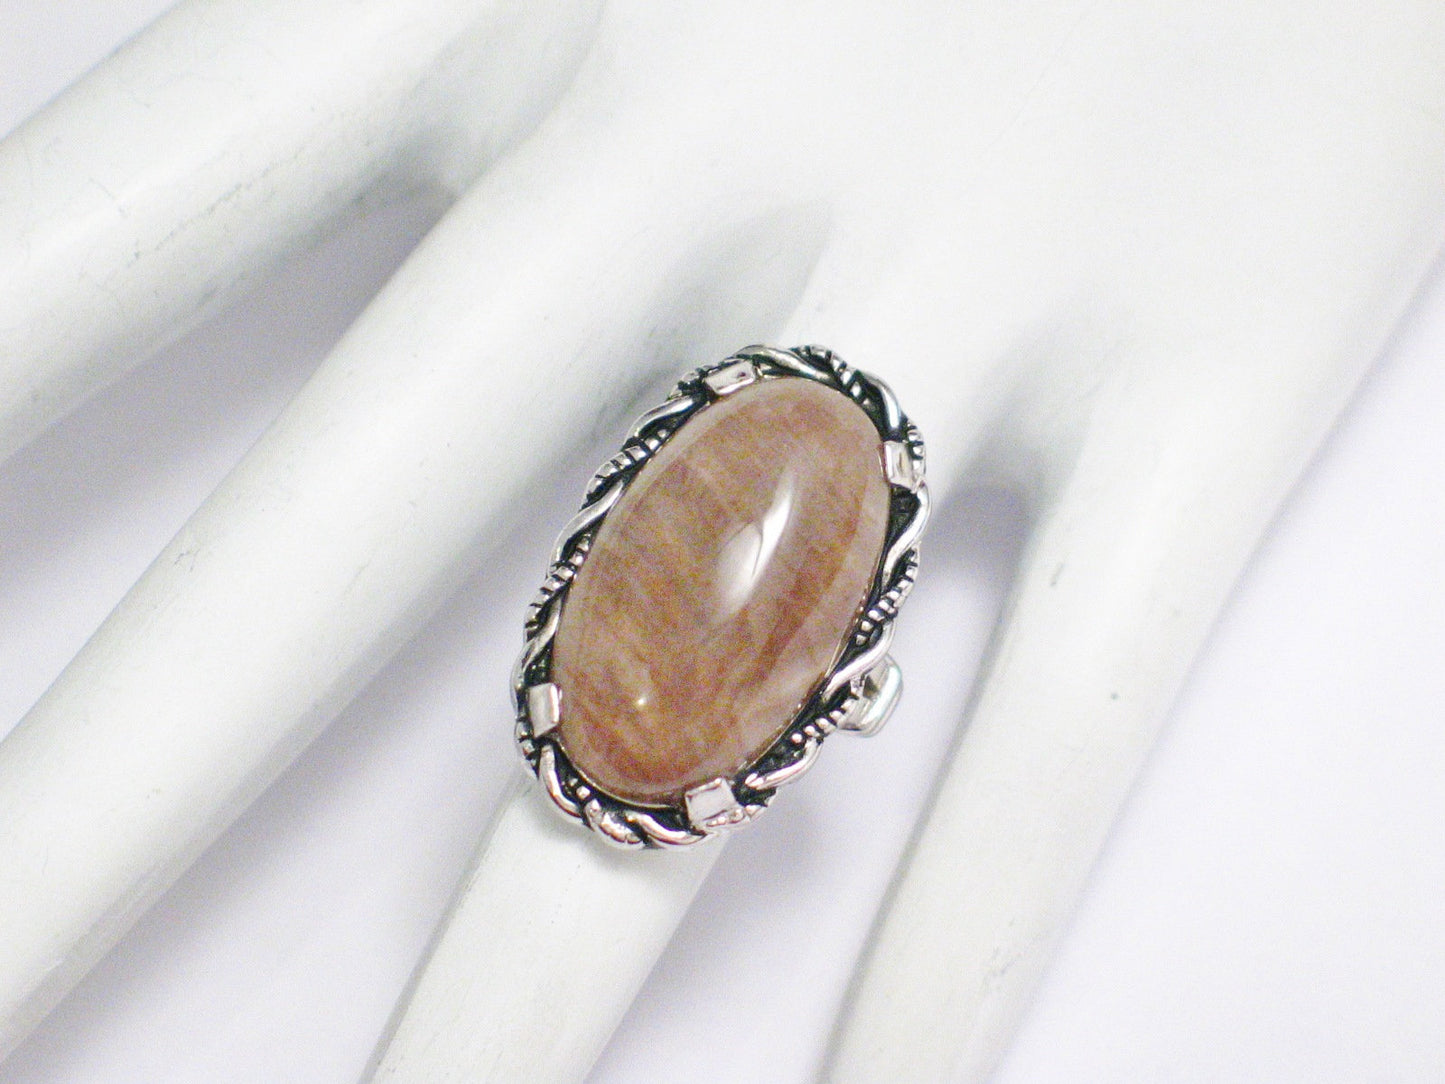 Silver Ring | Sterling Silver Oval Neutral Tone Banded Agate Ring  4.75 | Blingschlingers Jewelry